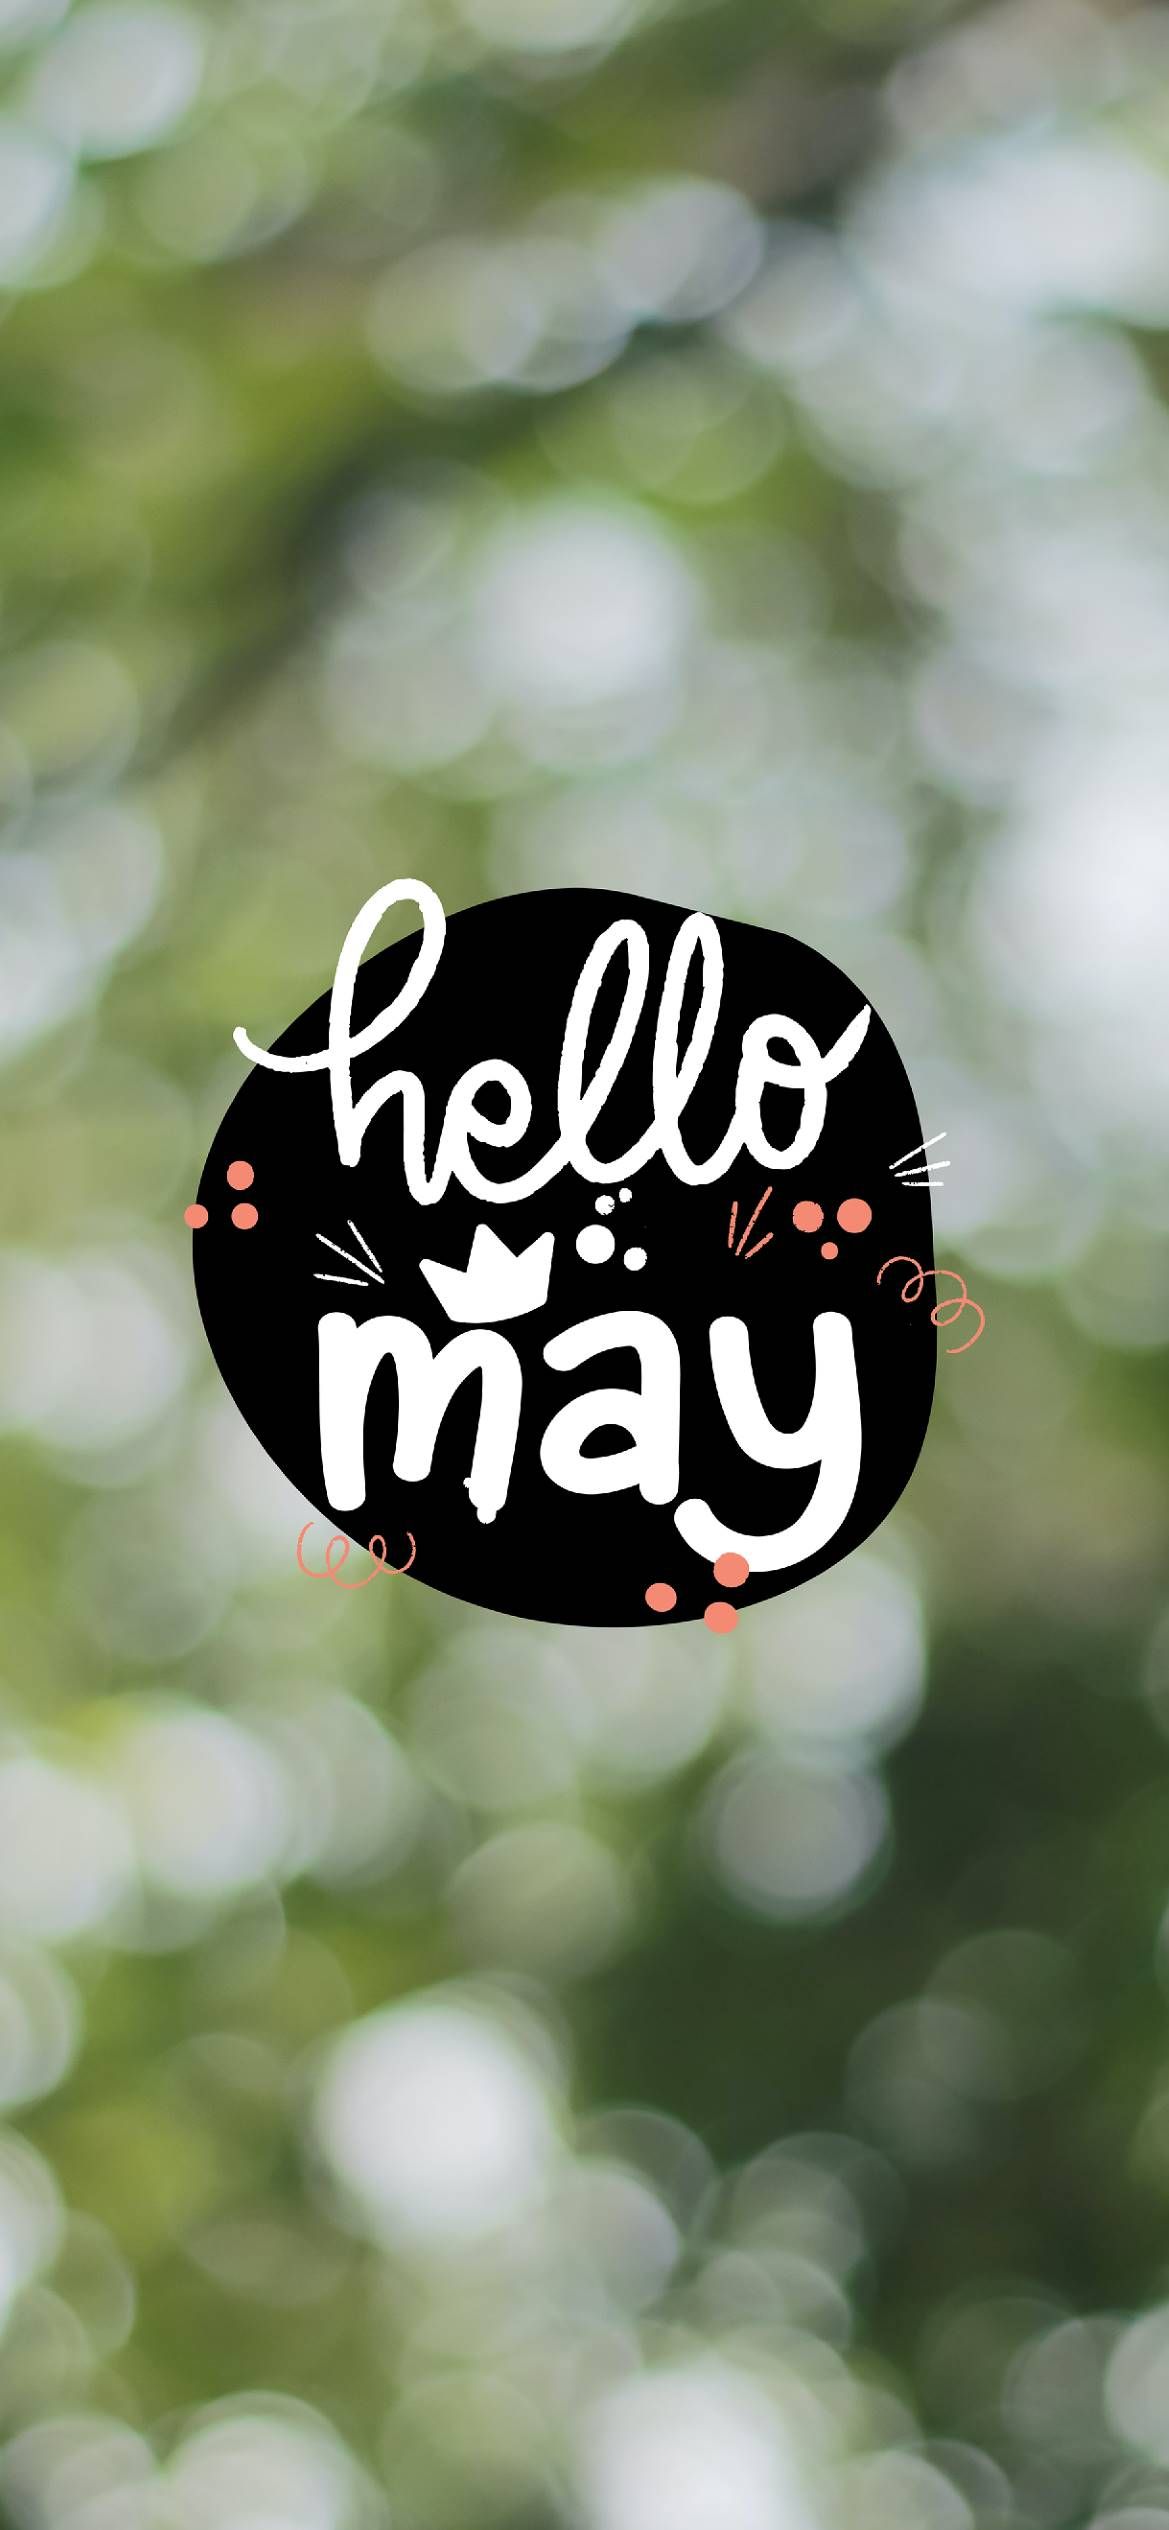 Hello May wallpaper for iPhone and Android phone. - May